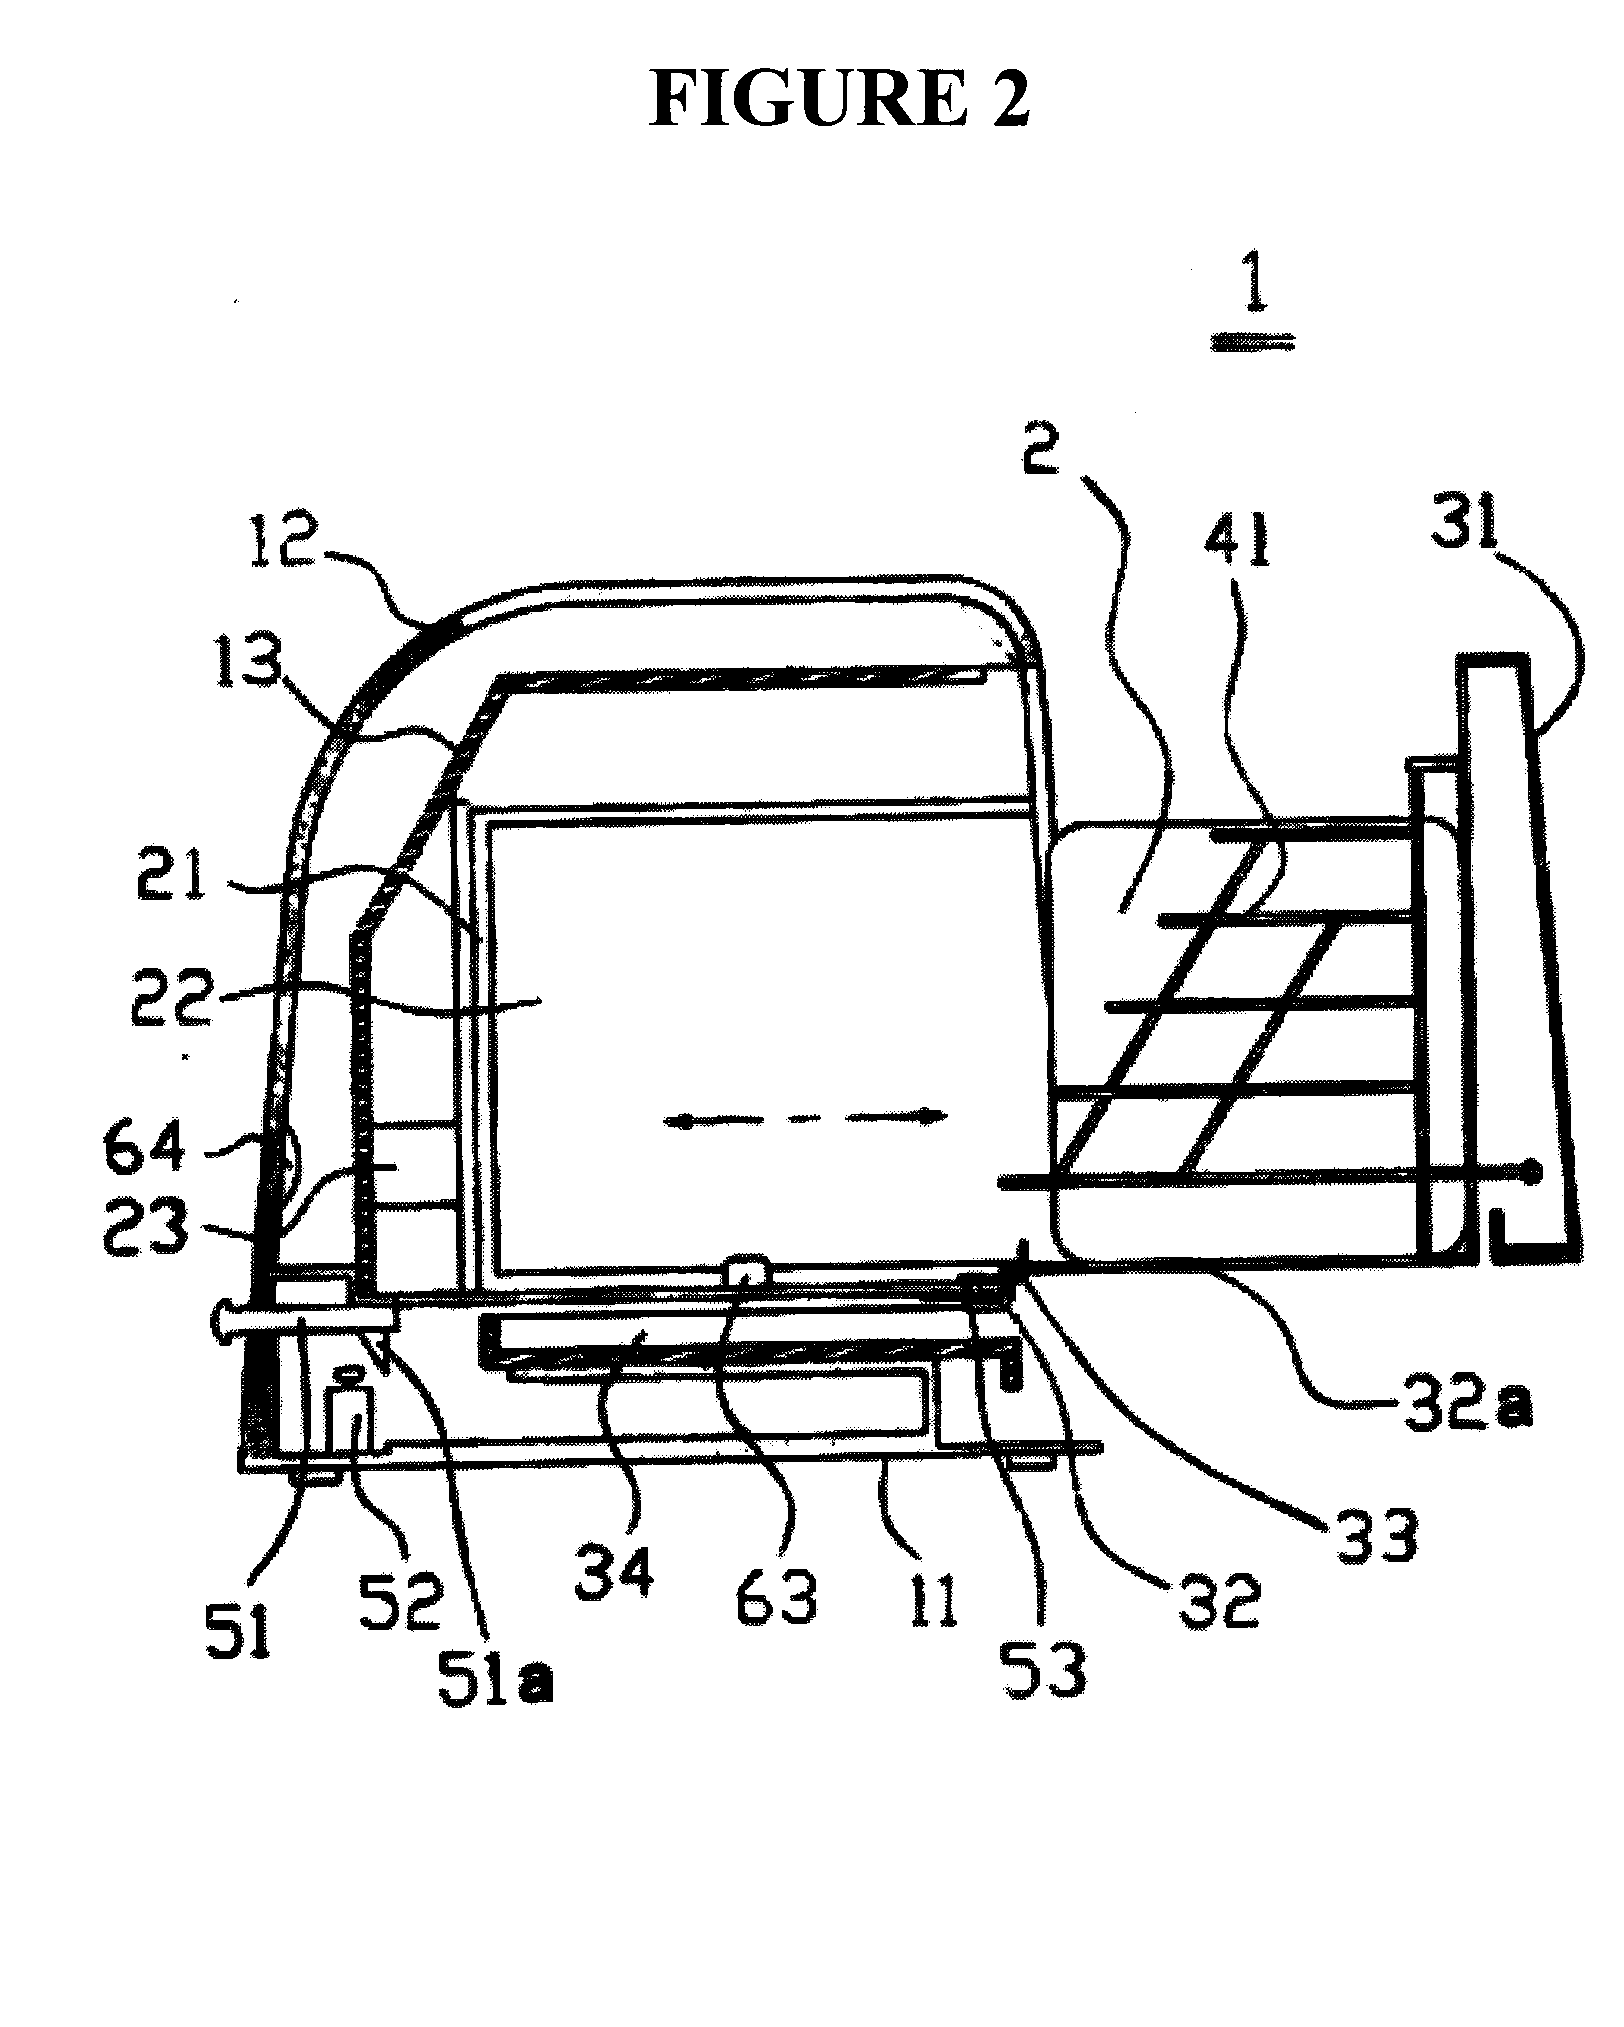 Toaster-and-Oven Device